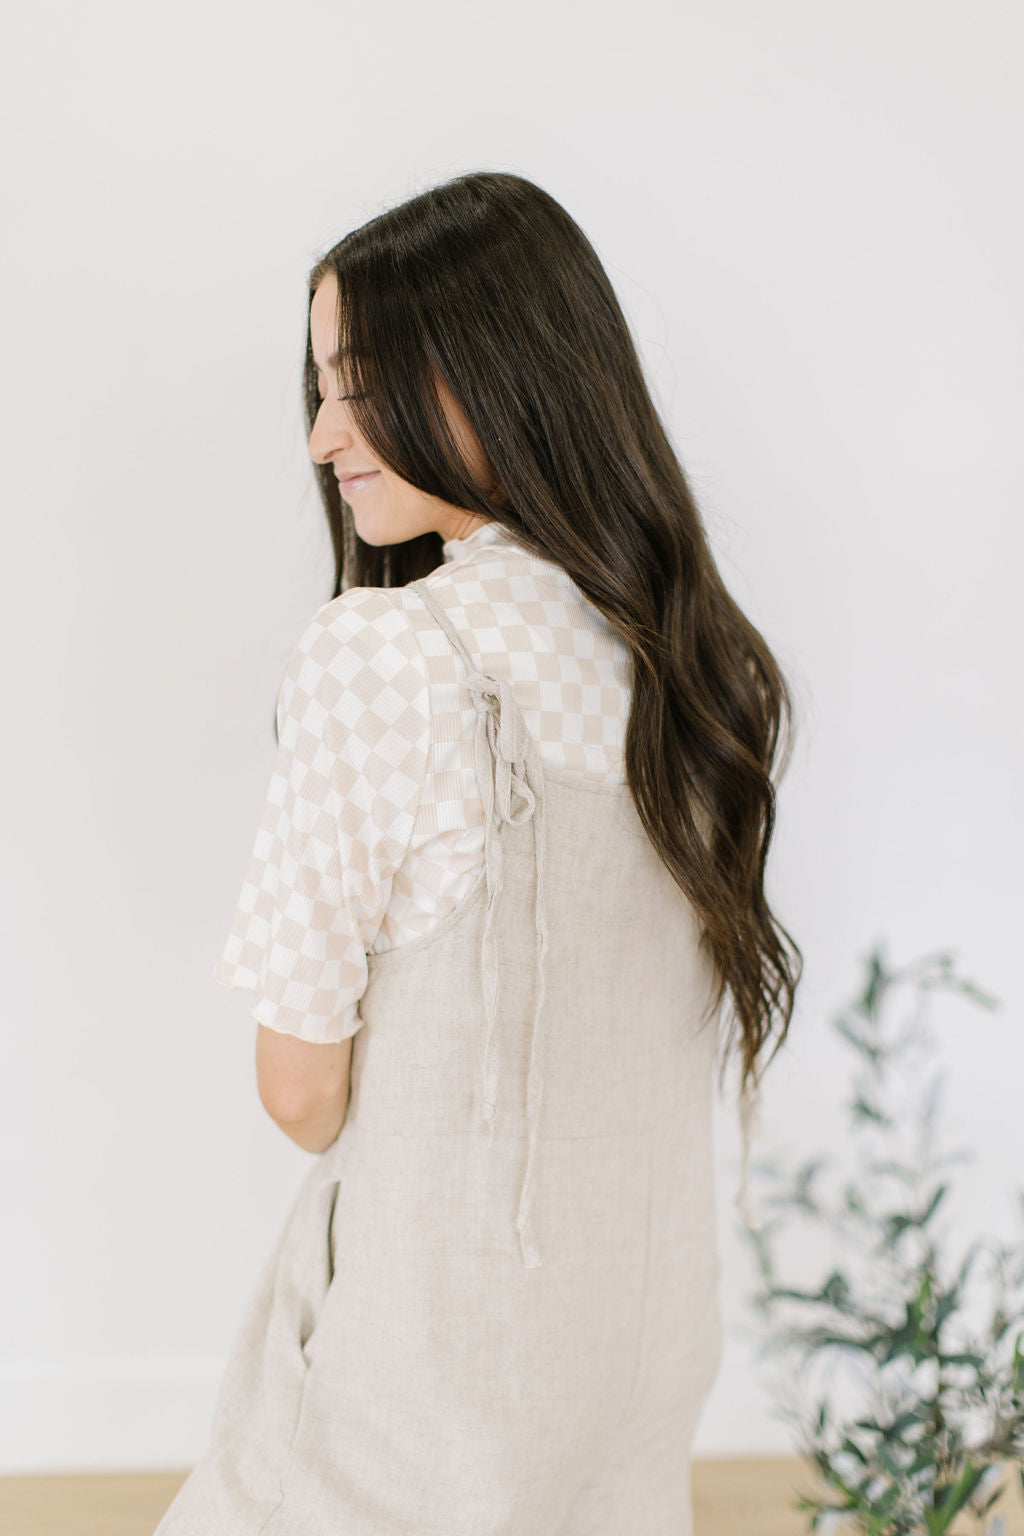 Cece Checkered Top in Taupe